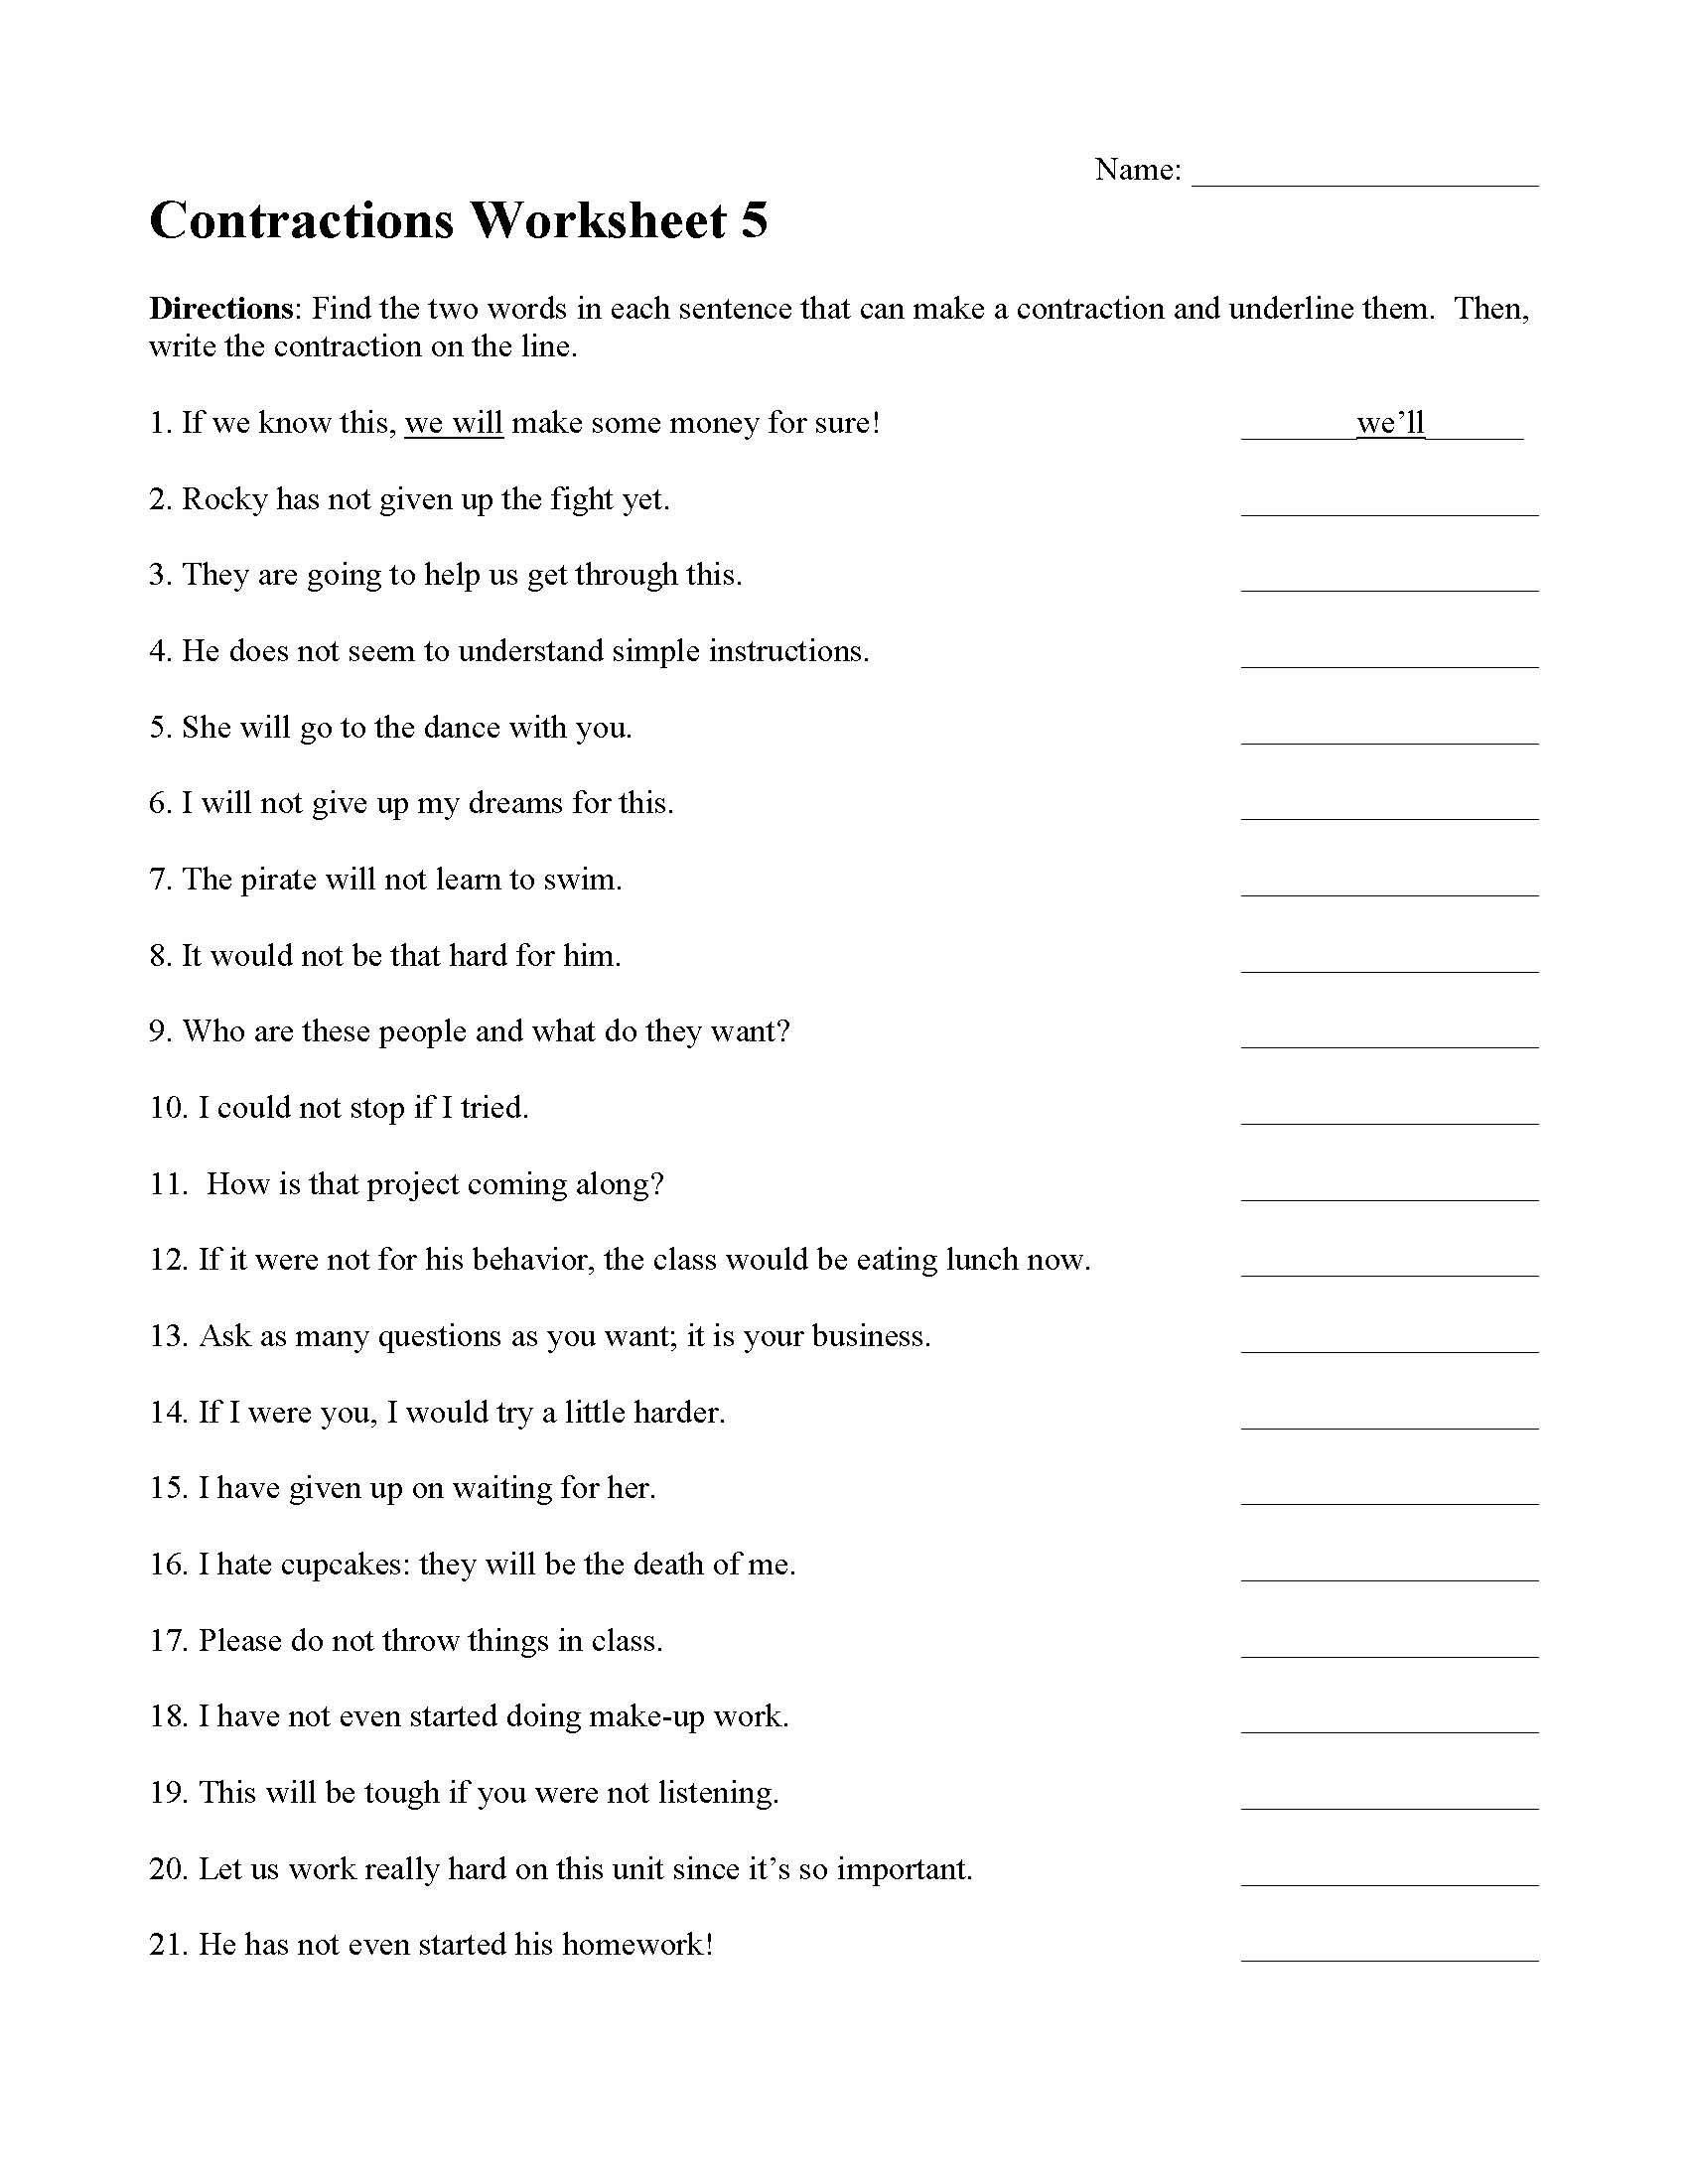 contraction-worksheets